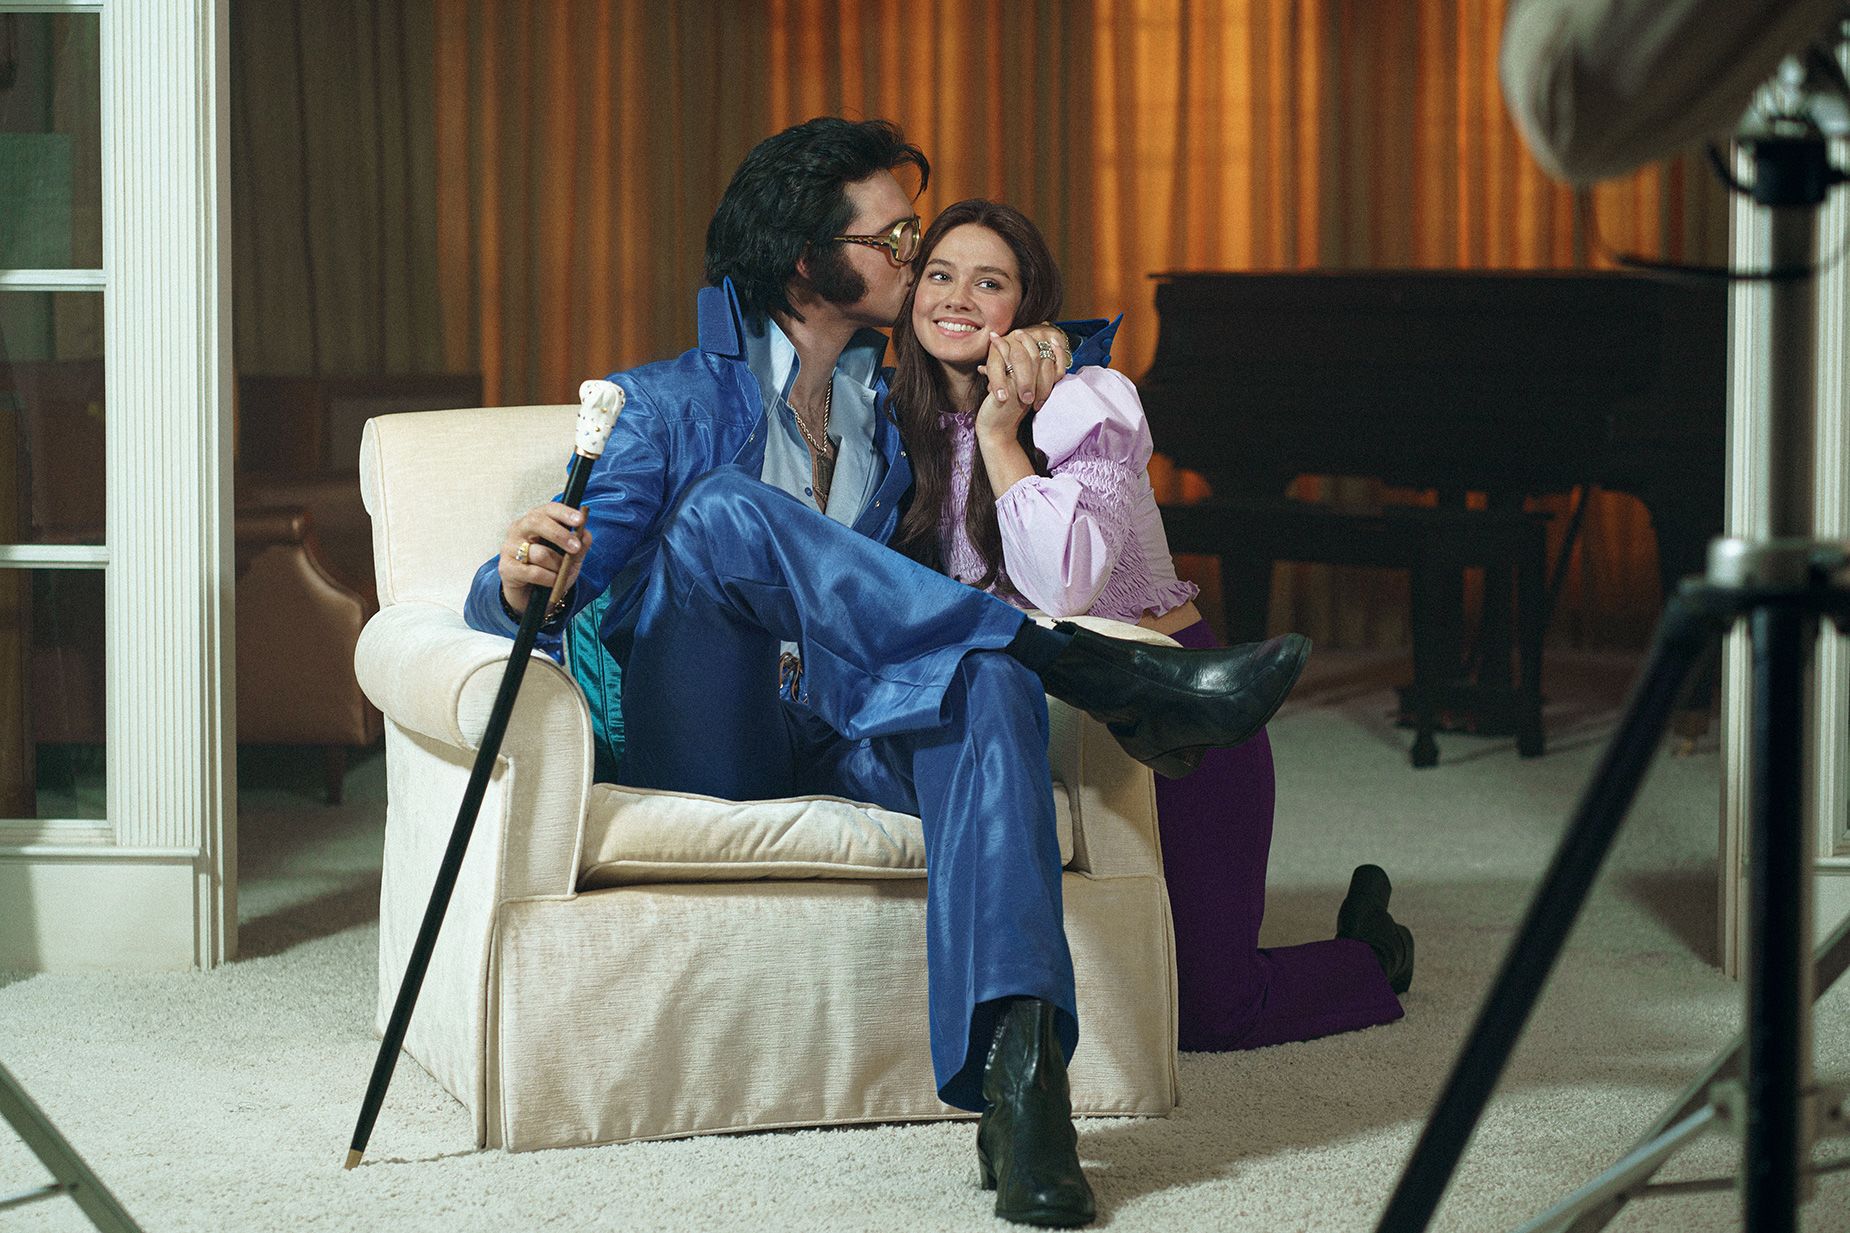 Only a handful of the costumes in the film, such as this recreation of that 1970 family photoshoot, are historically accurate.